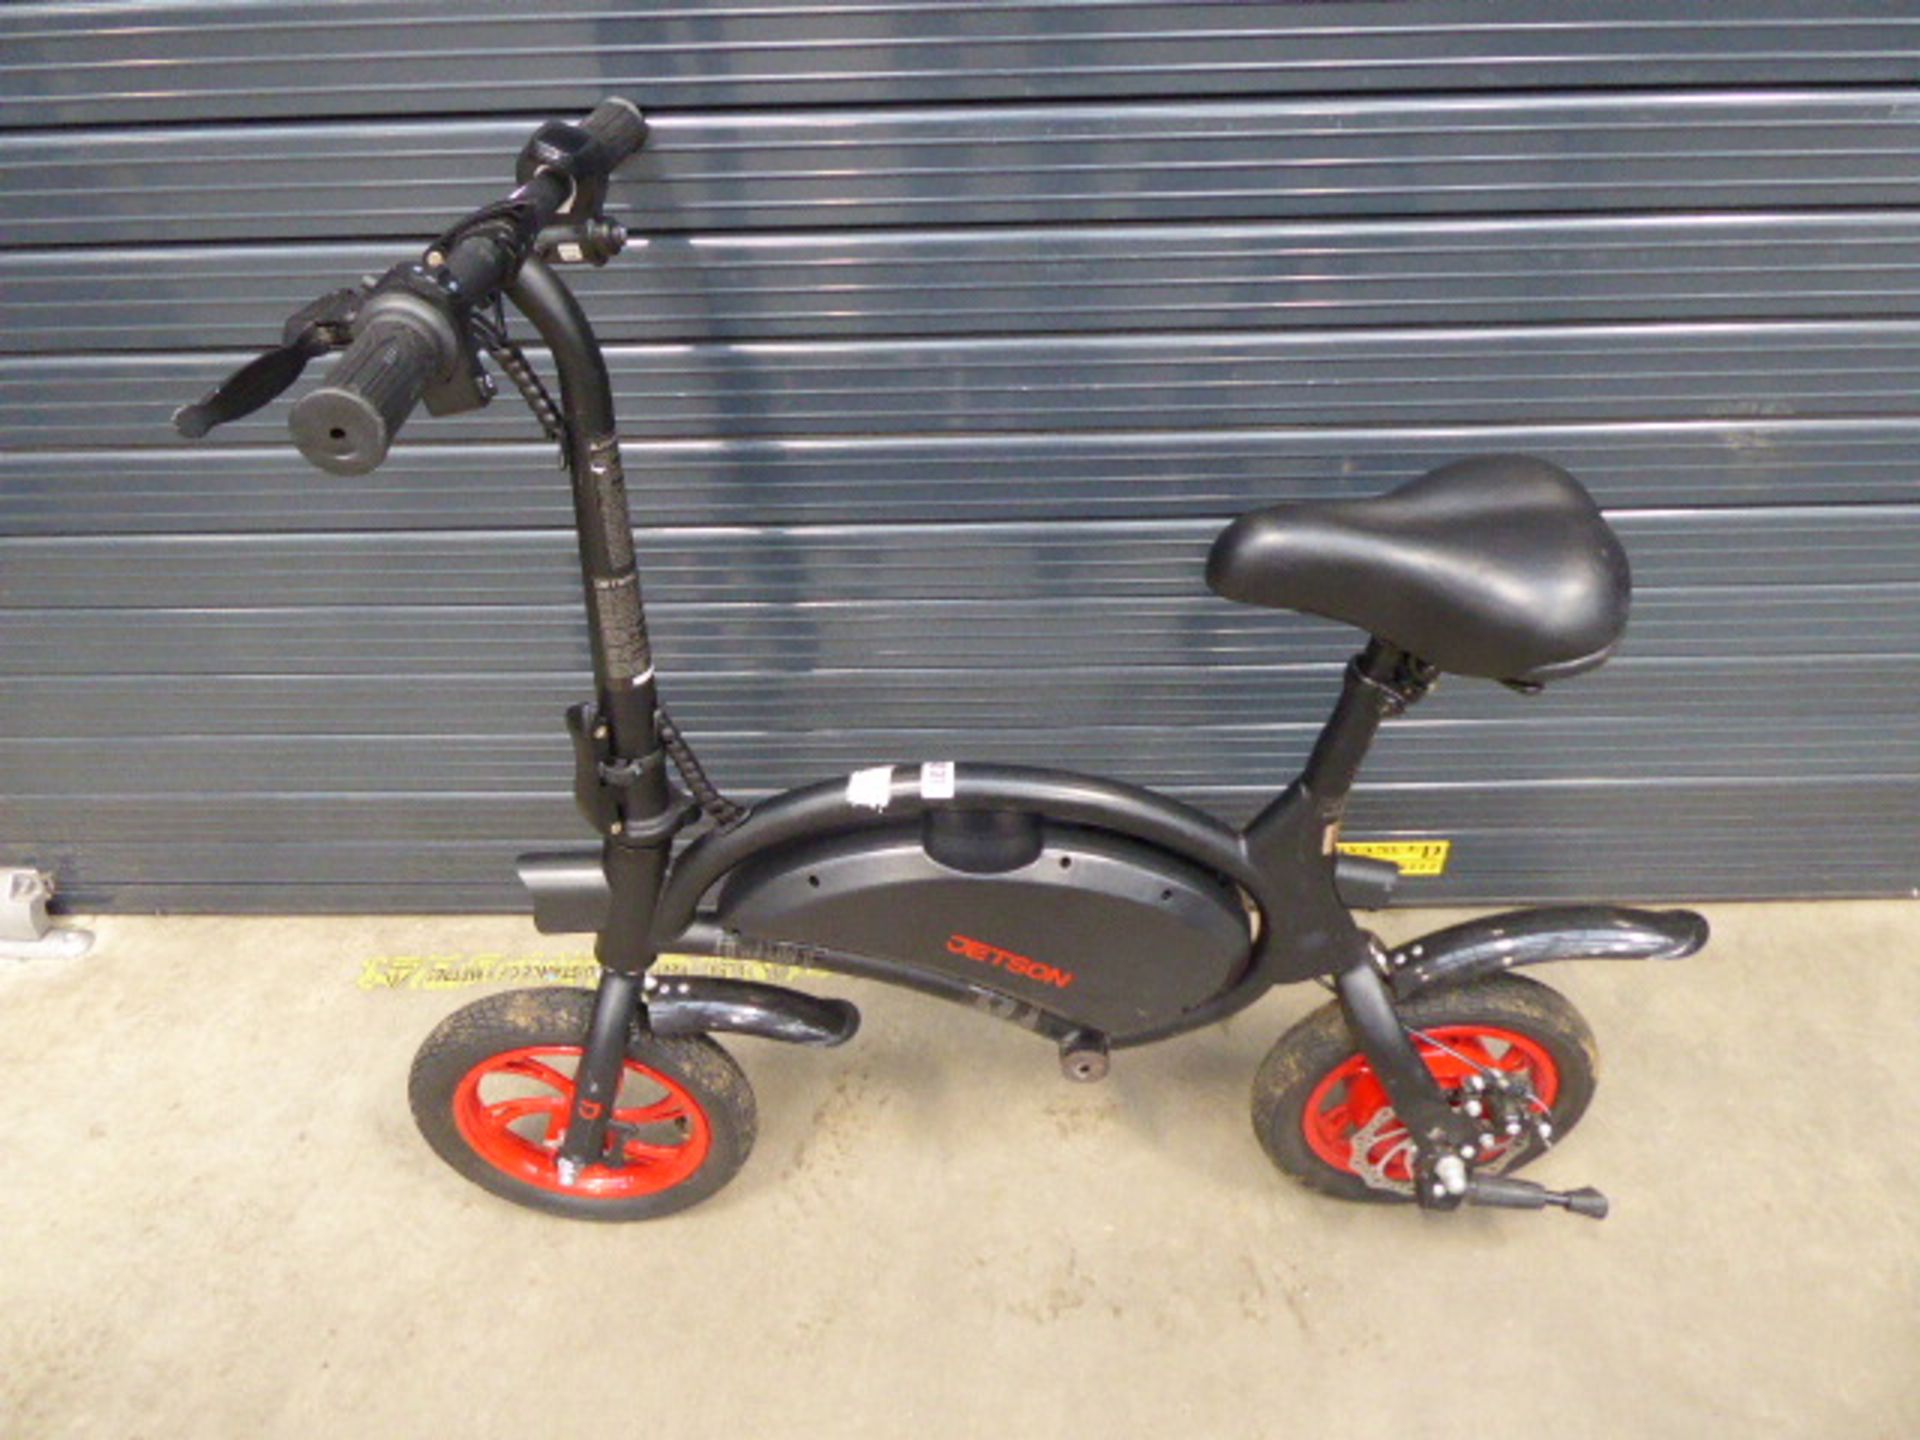 Jetson electric cycle (no charger/no footpegs)